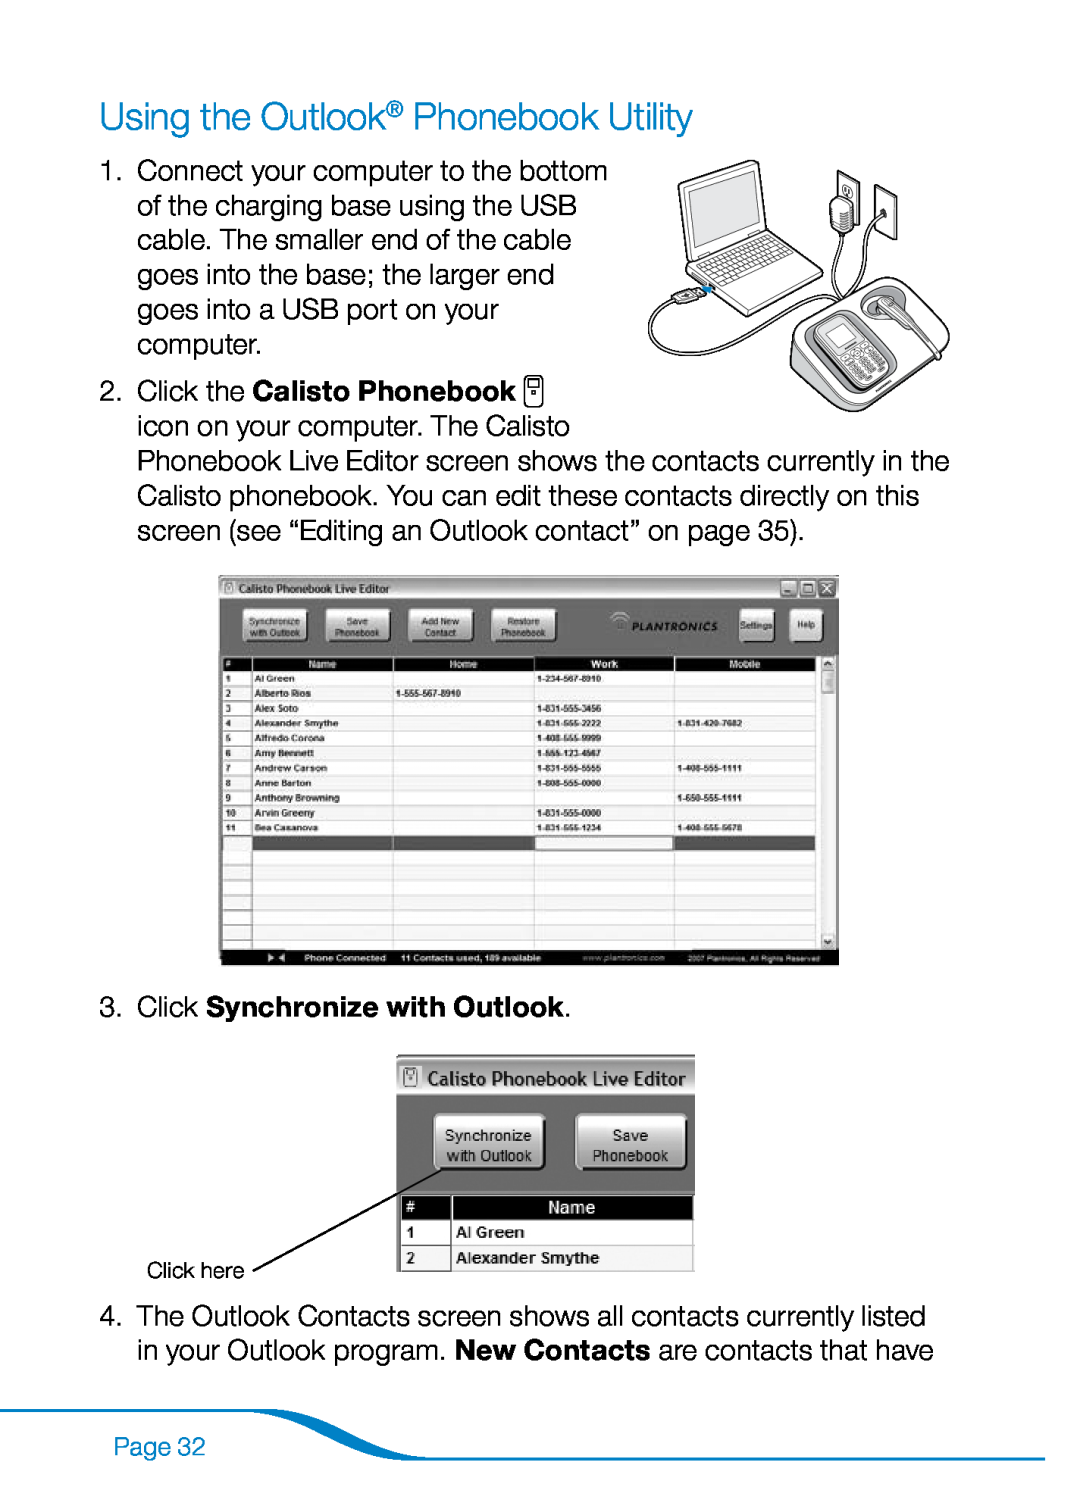 Plantronics 655 manual Using the Outlook Phonebook Utility, Click Synchronize with Outlook 